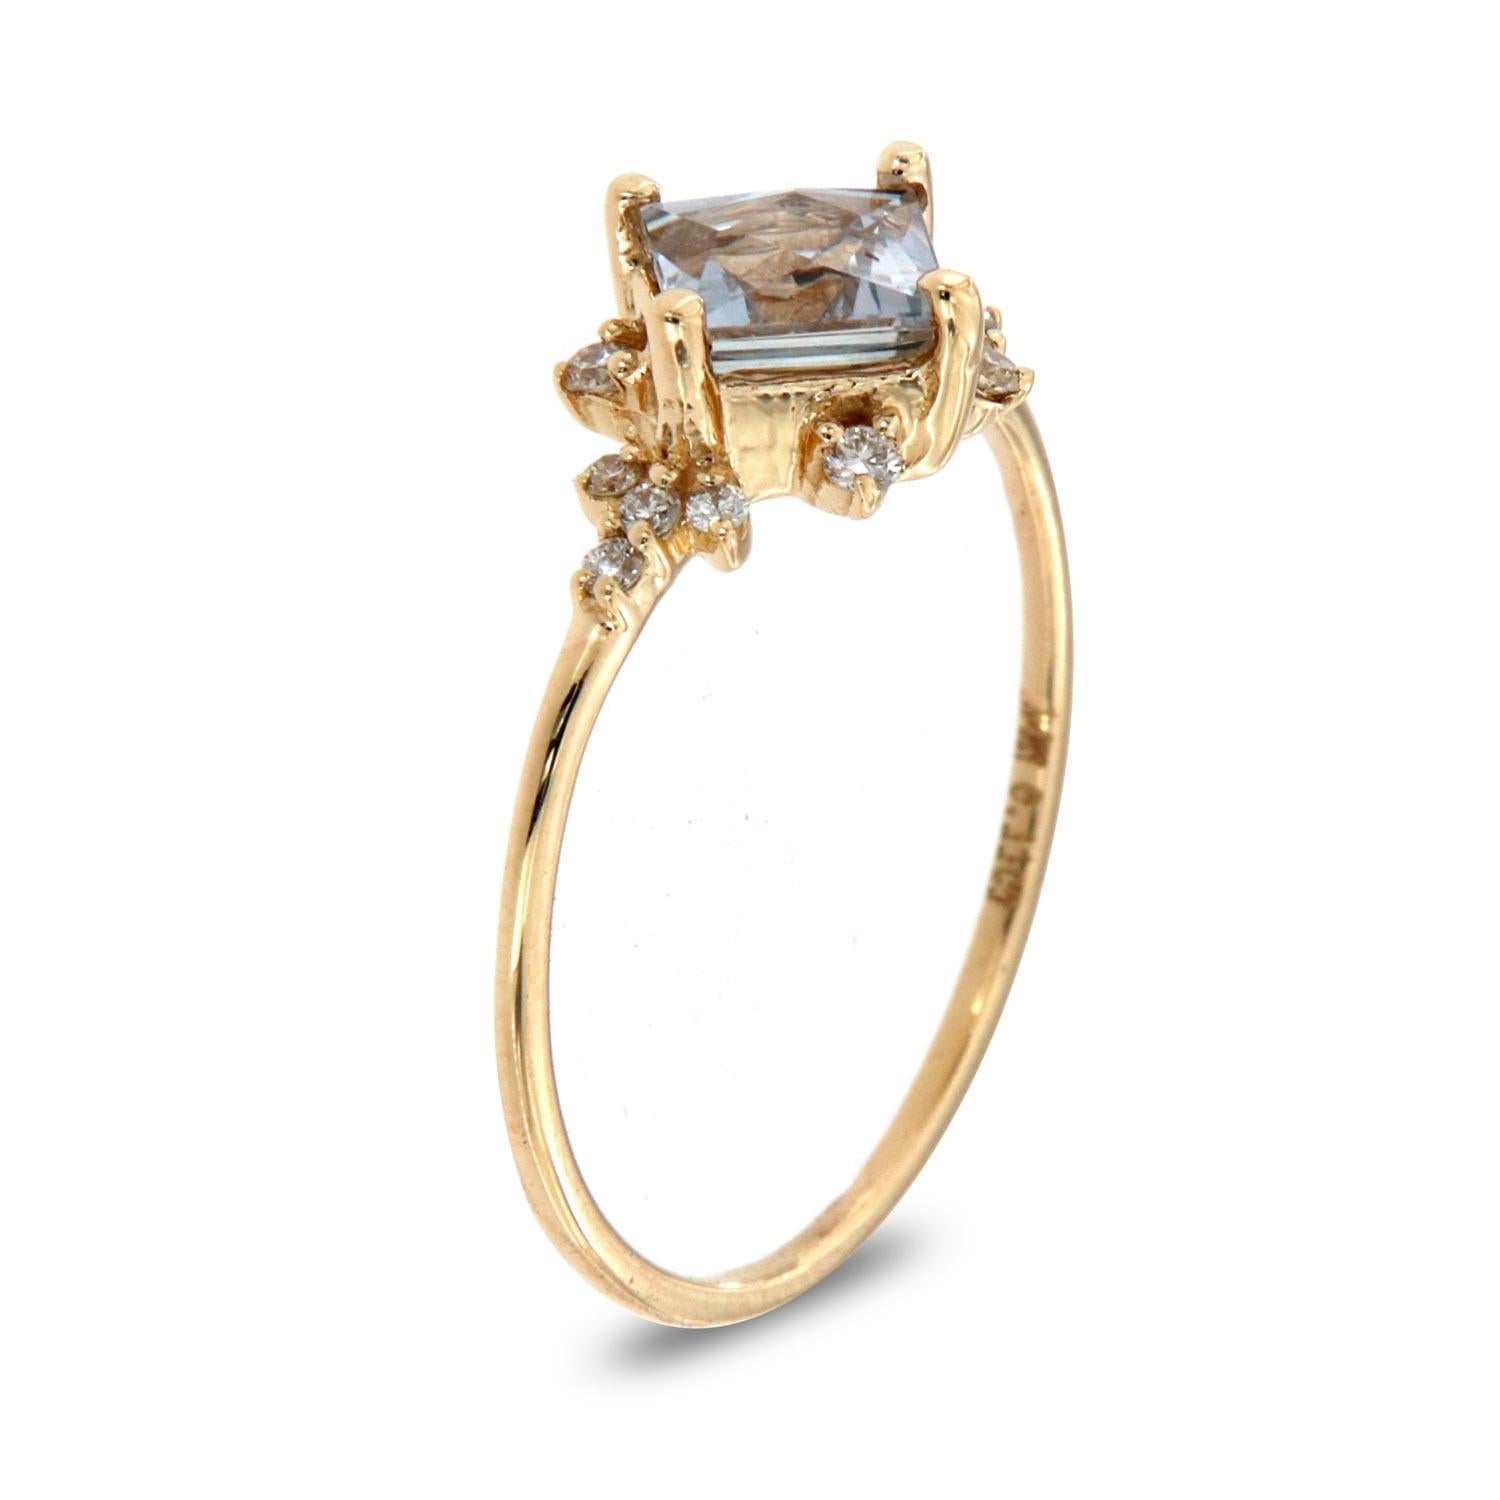 This petite organic style rustic ring is impressive in its vintage appeal, featuring a natural lavender french carre sapphire, accented with round brilliant diamonds. Experience the difference in person!

Product details: 

Center Gemstone Type: